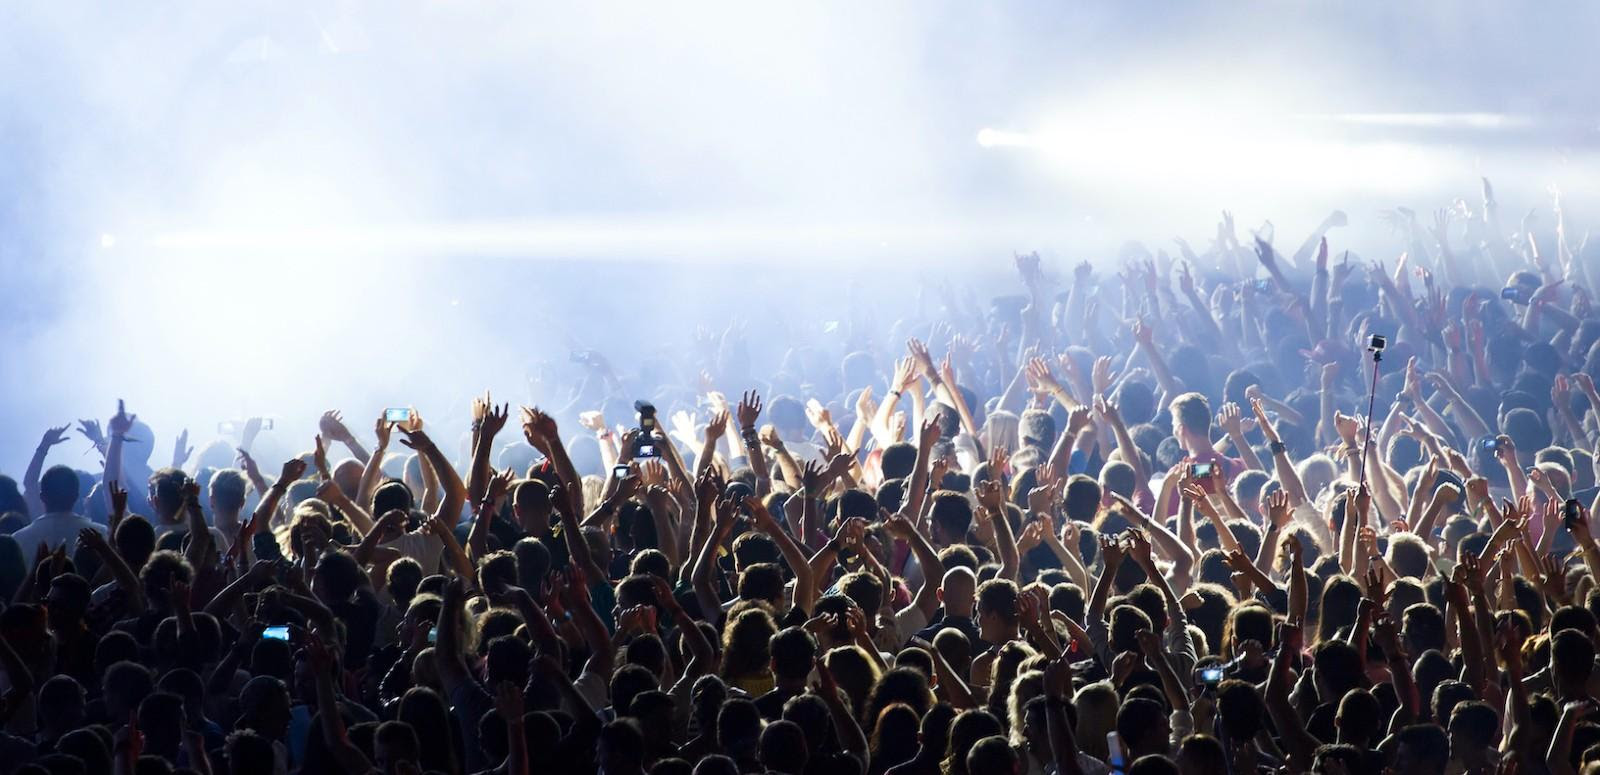 A cheering crowd at a rock concert